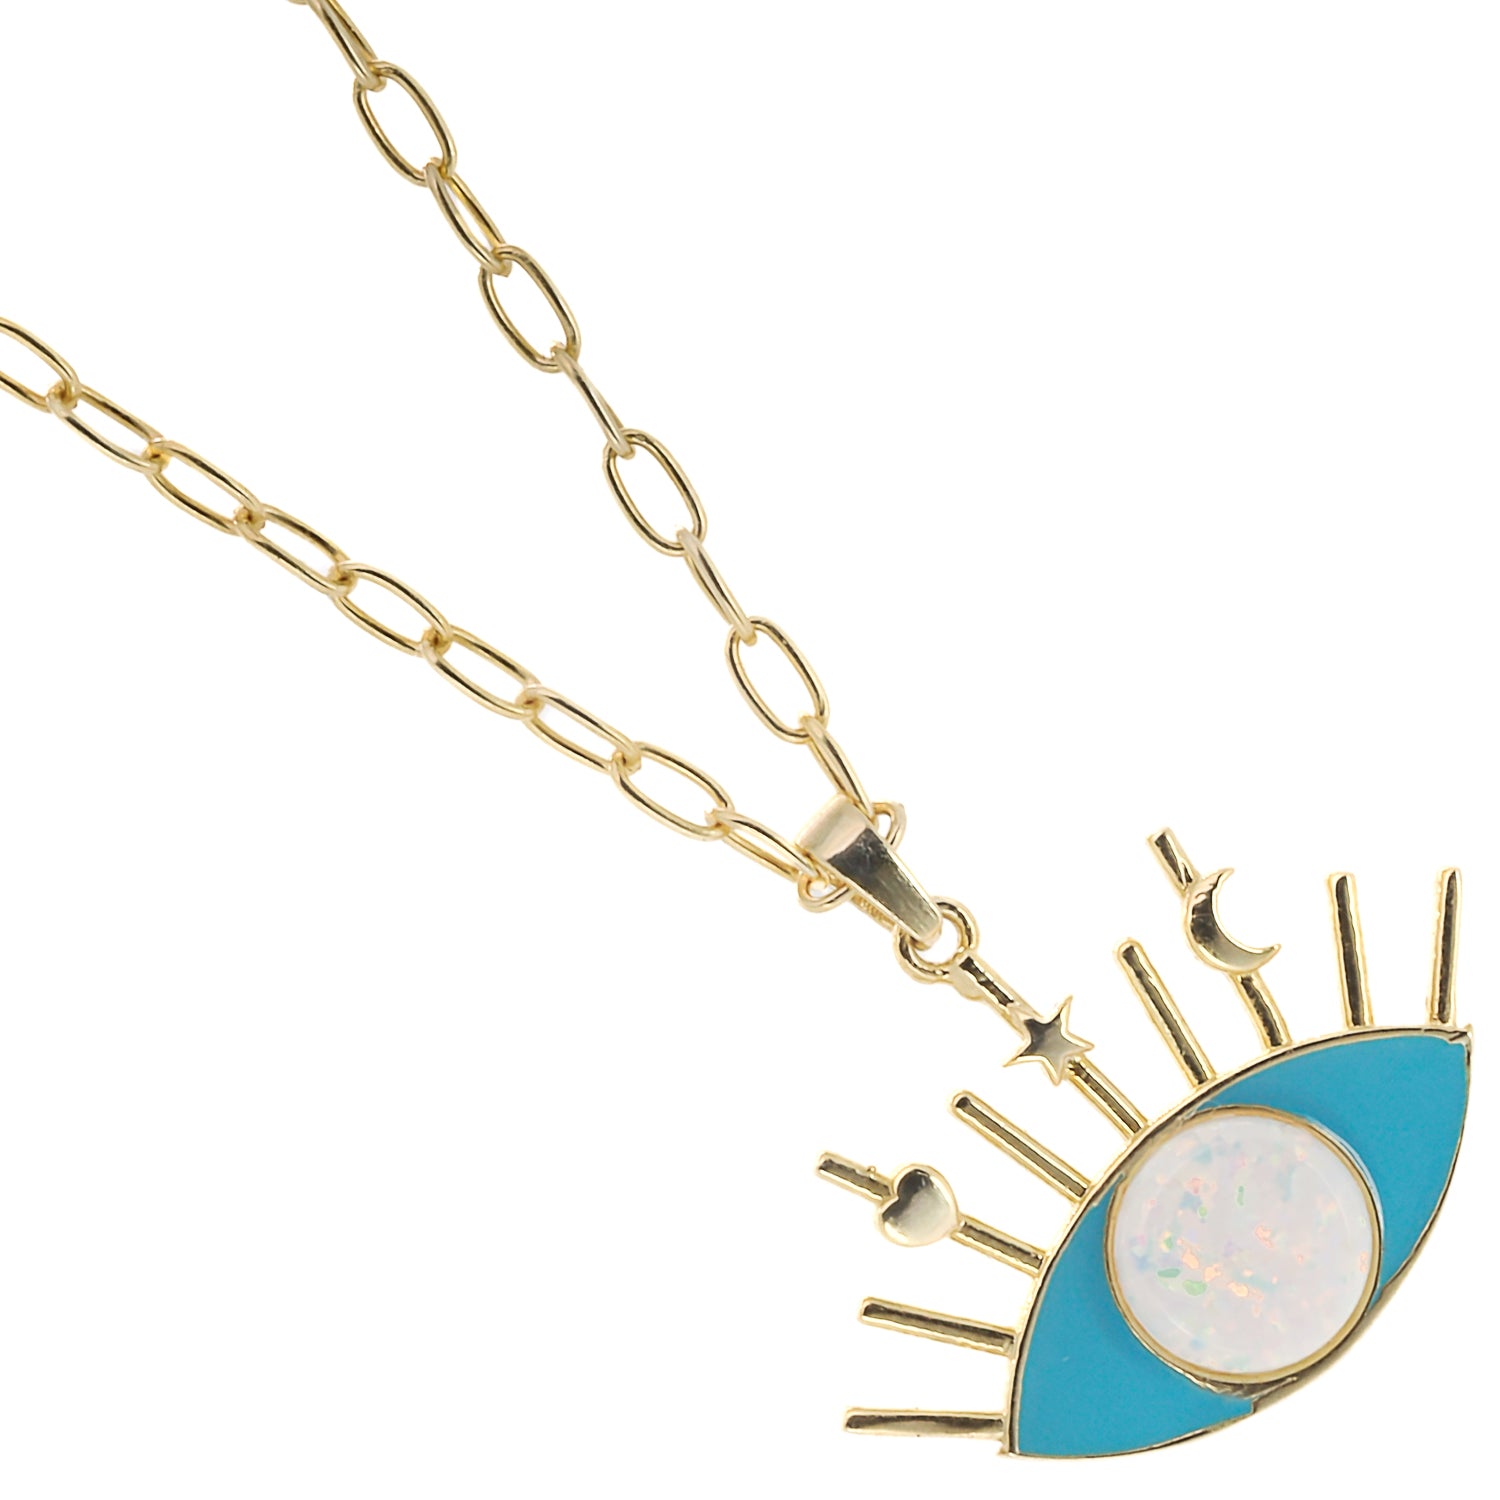 The striking contrast between the turquoise enamel and white opal on the Evil Eye pendant.